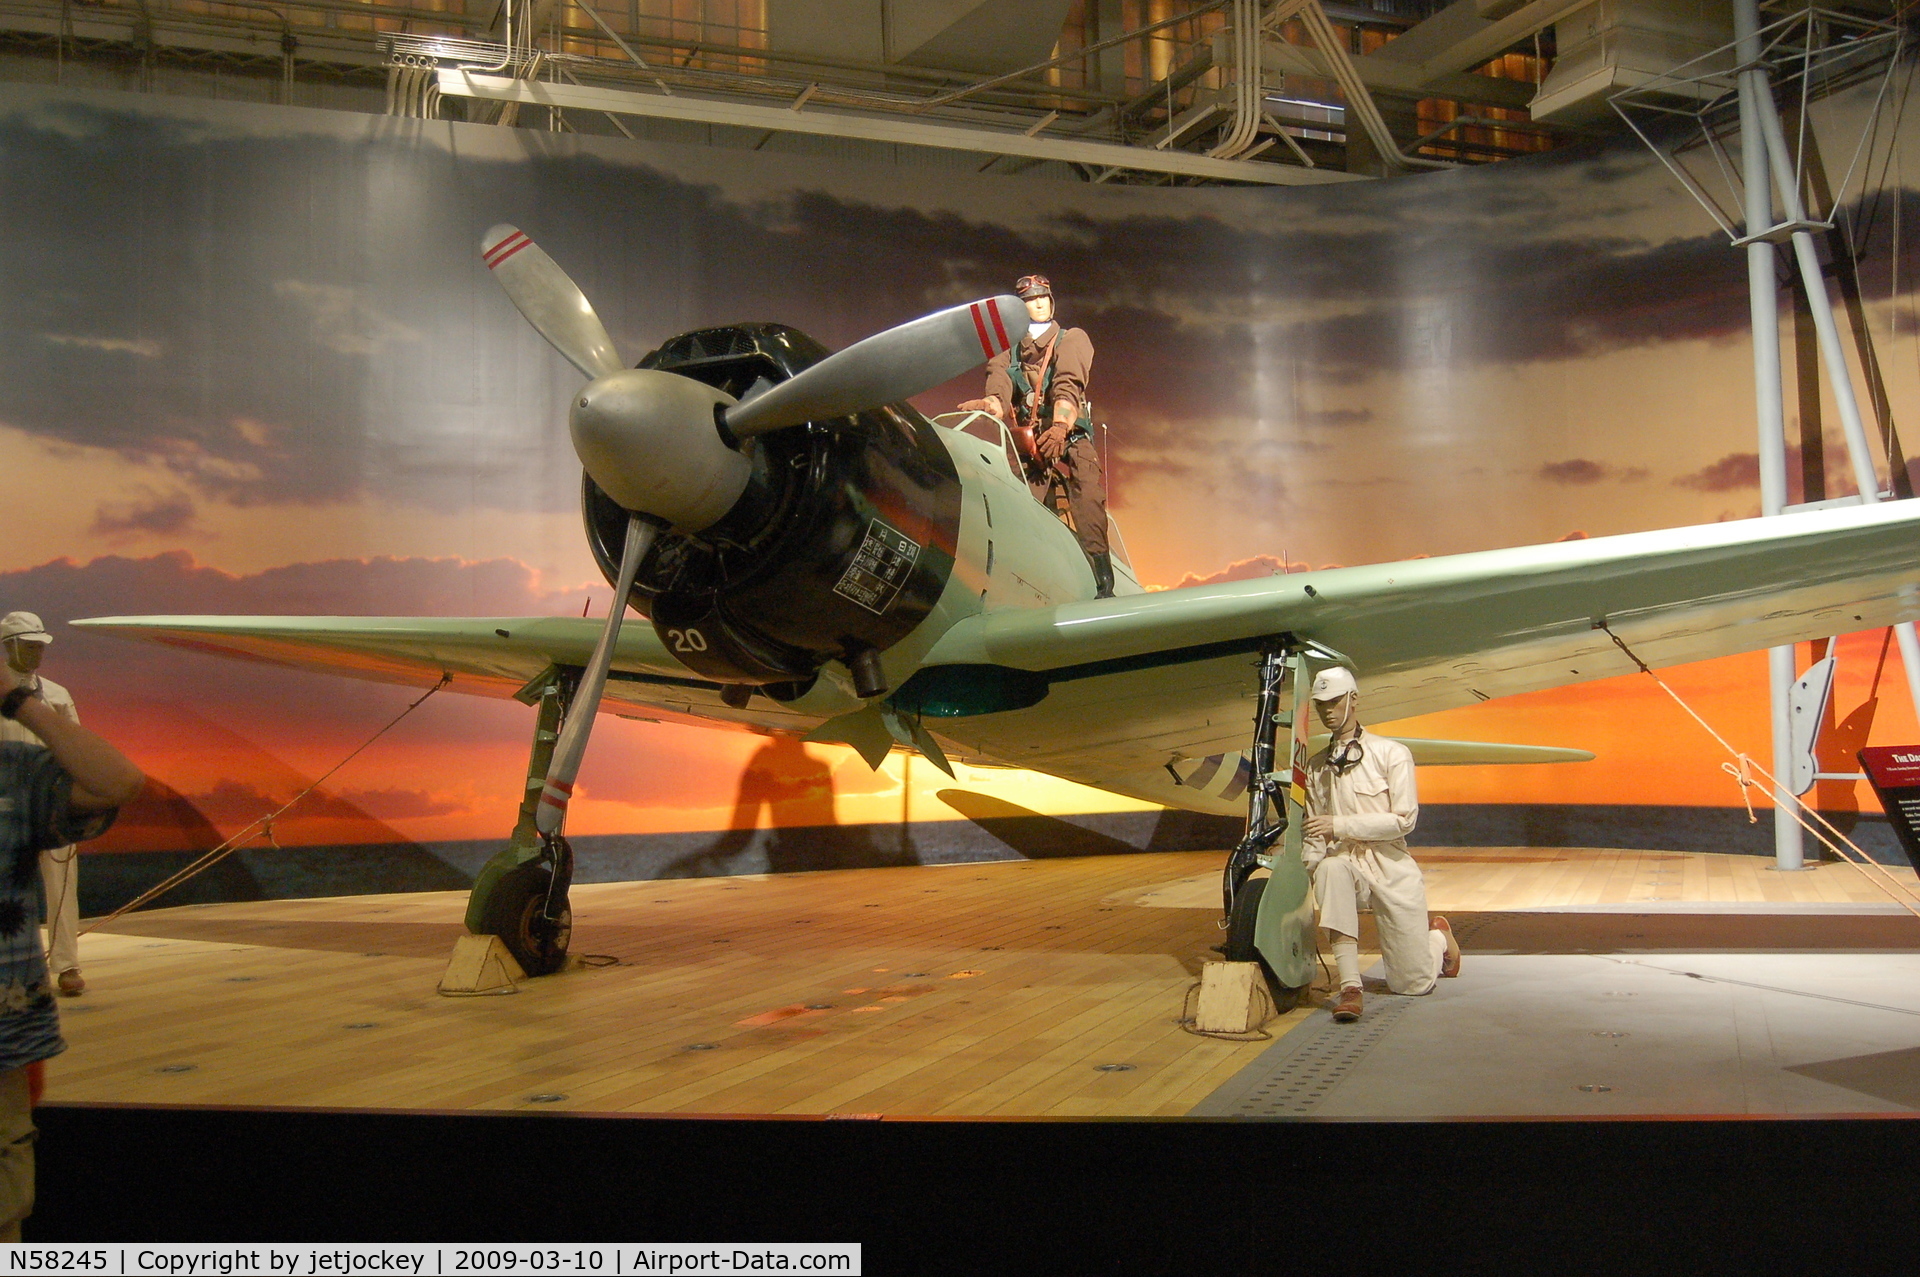 N58245, Mitsubishi A6M2-21 Zero C/N 807, A6M2 Zero on display at The Pacific Aviation Museum